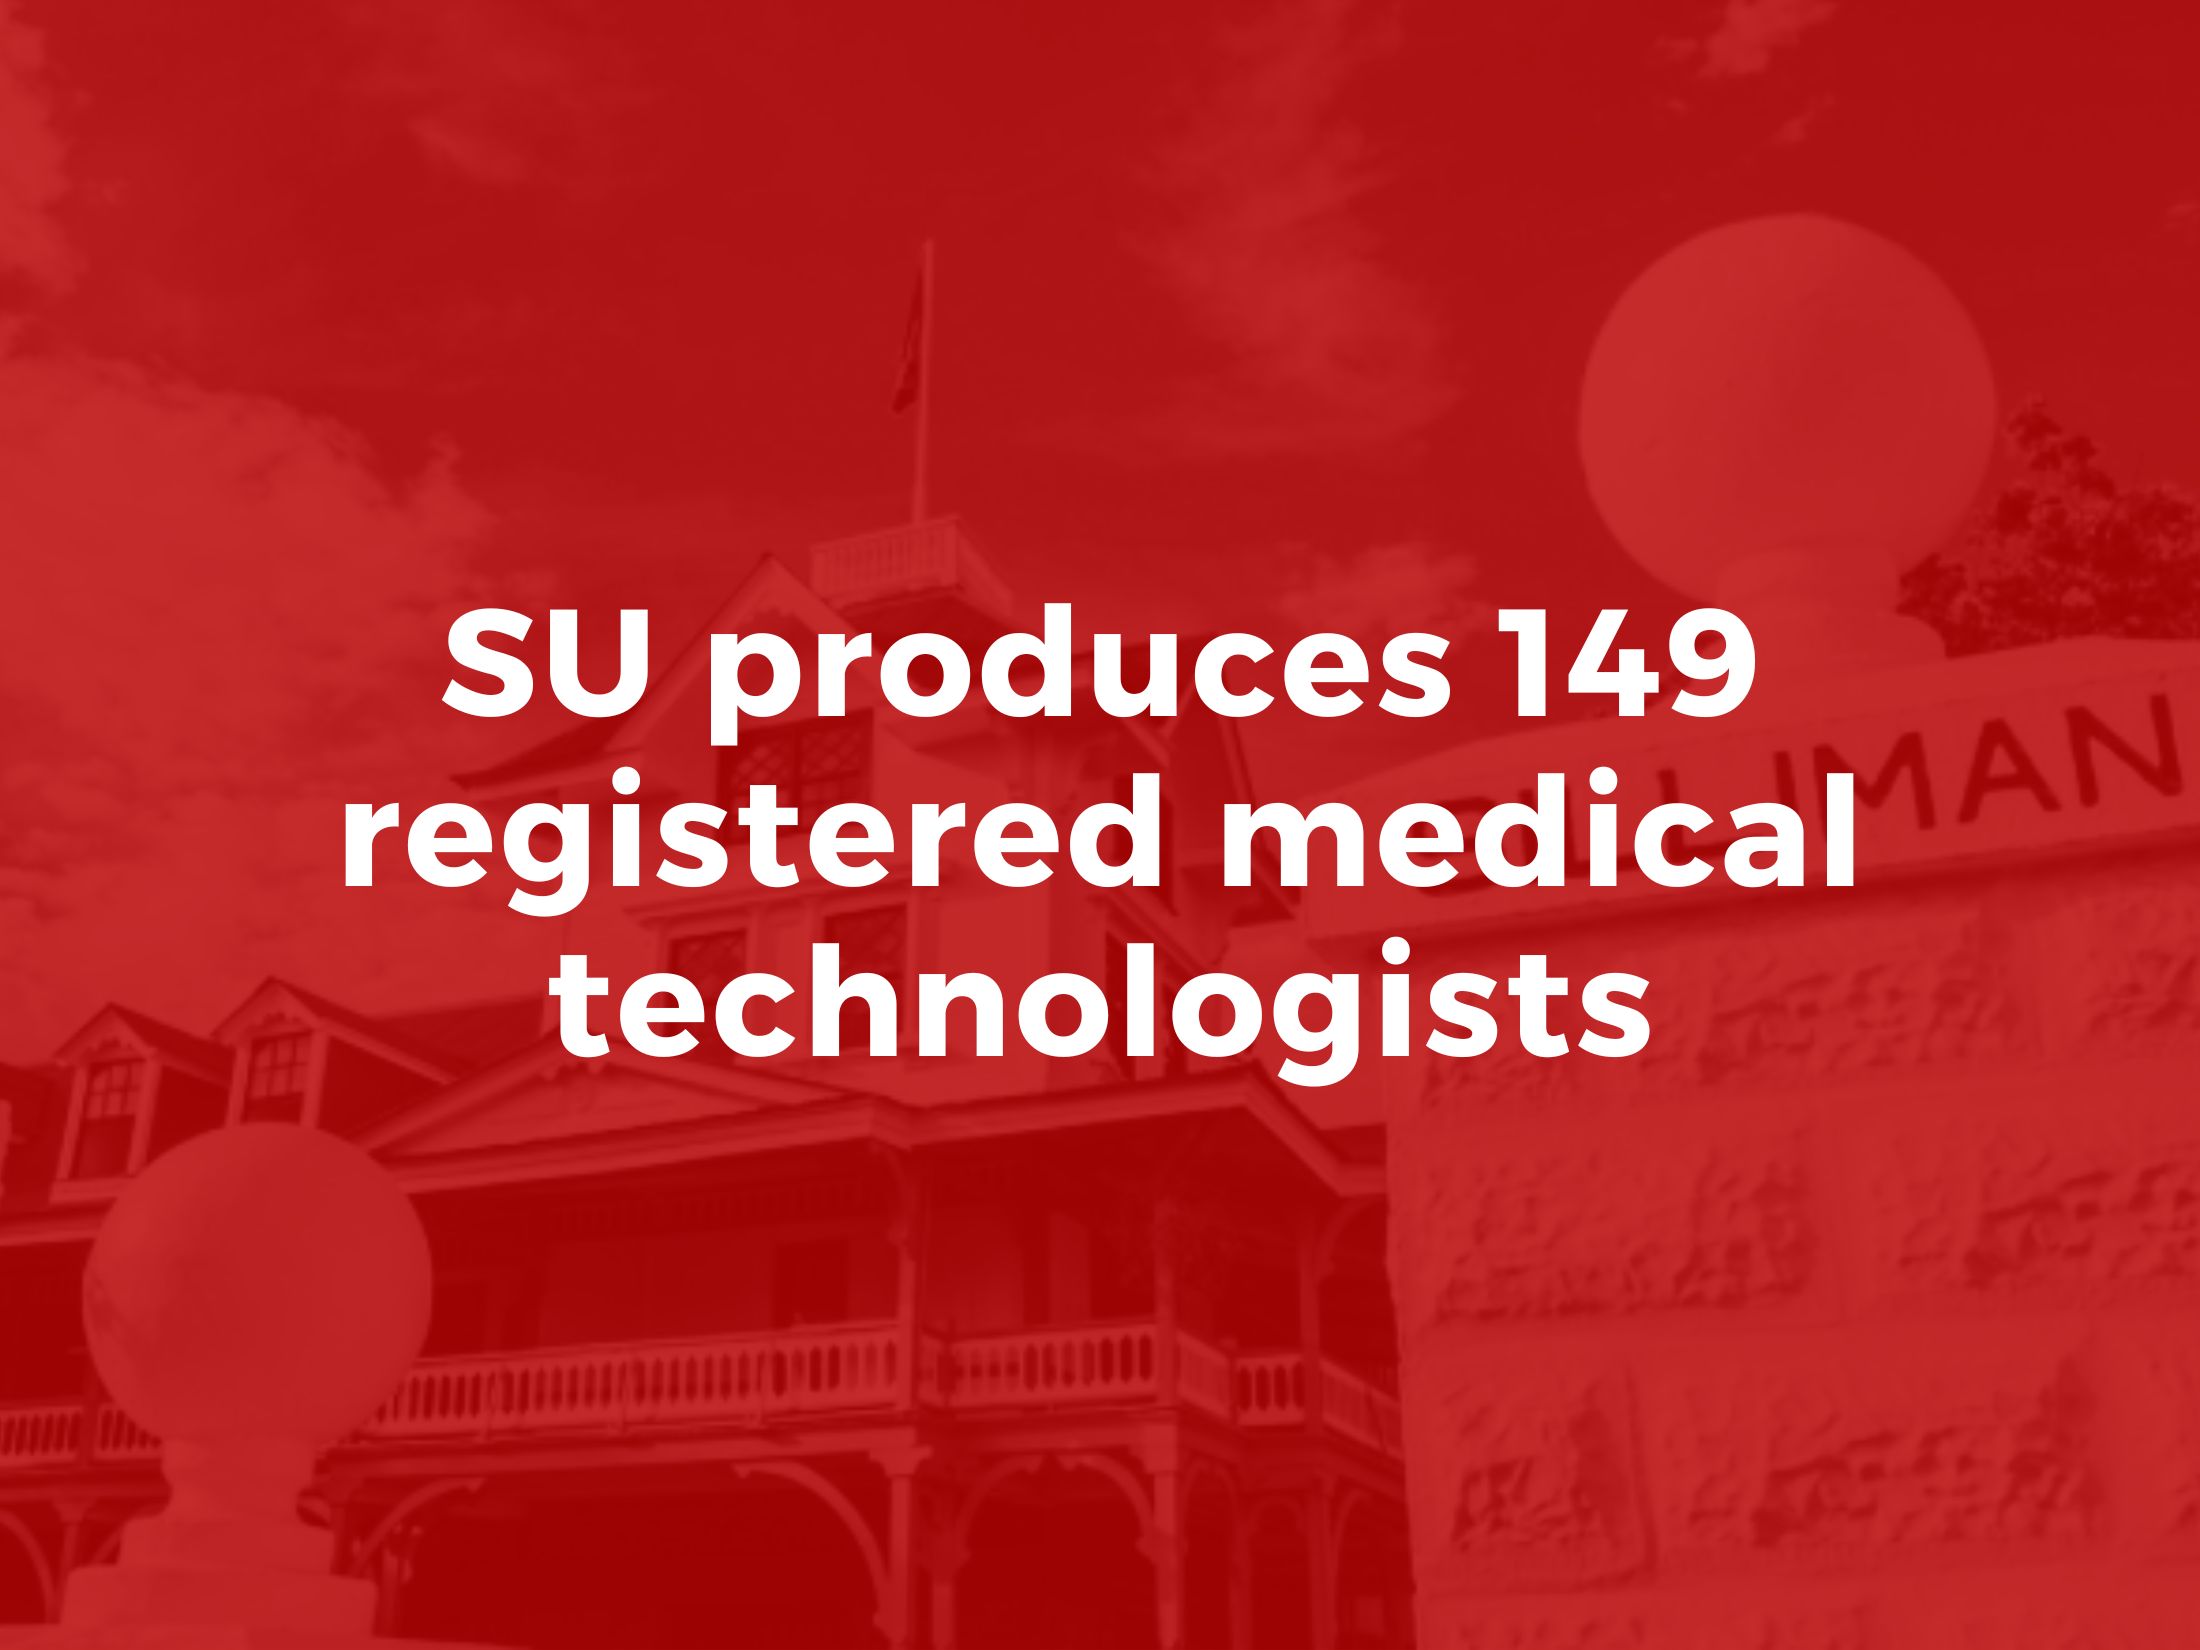 SU produces 149 registered medical technologists